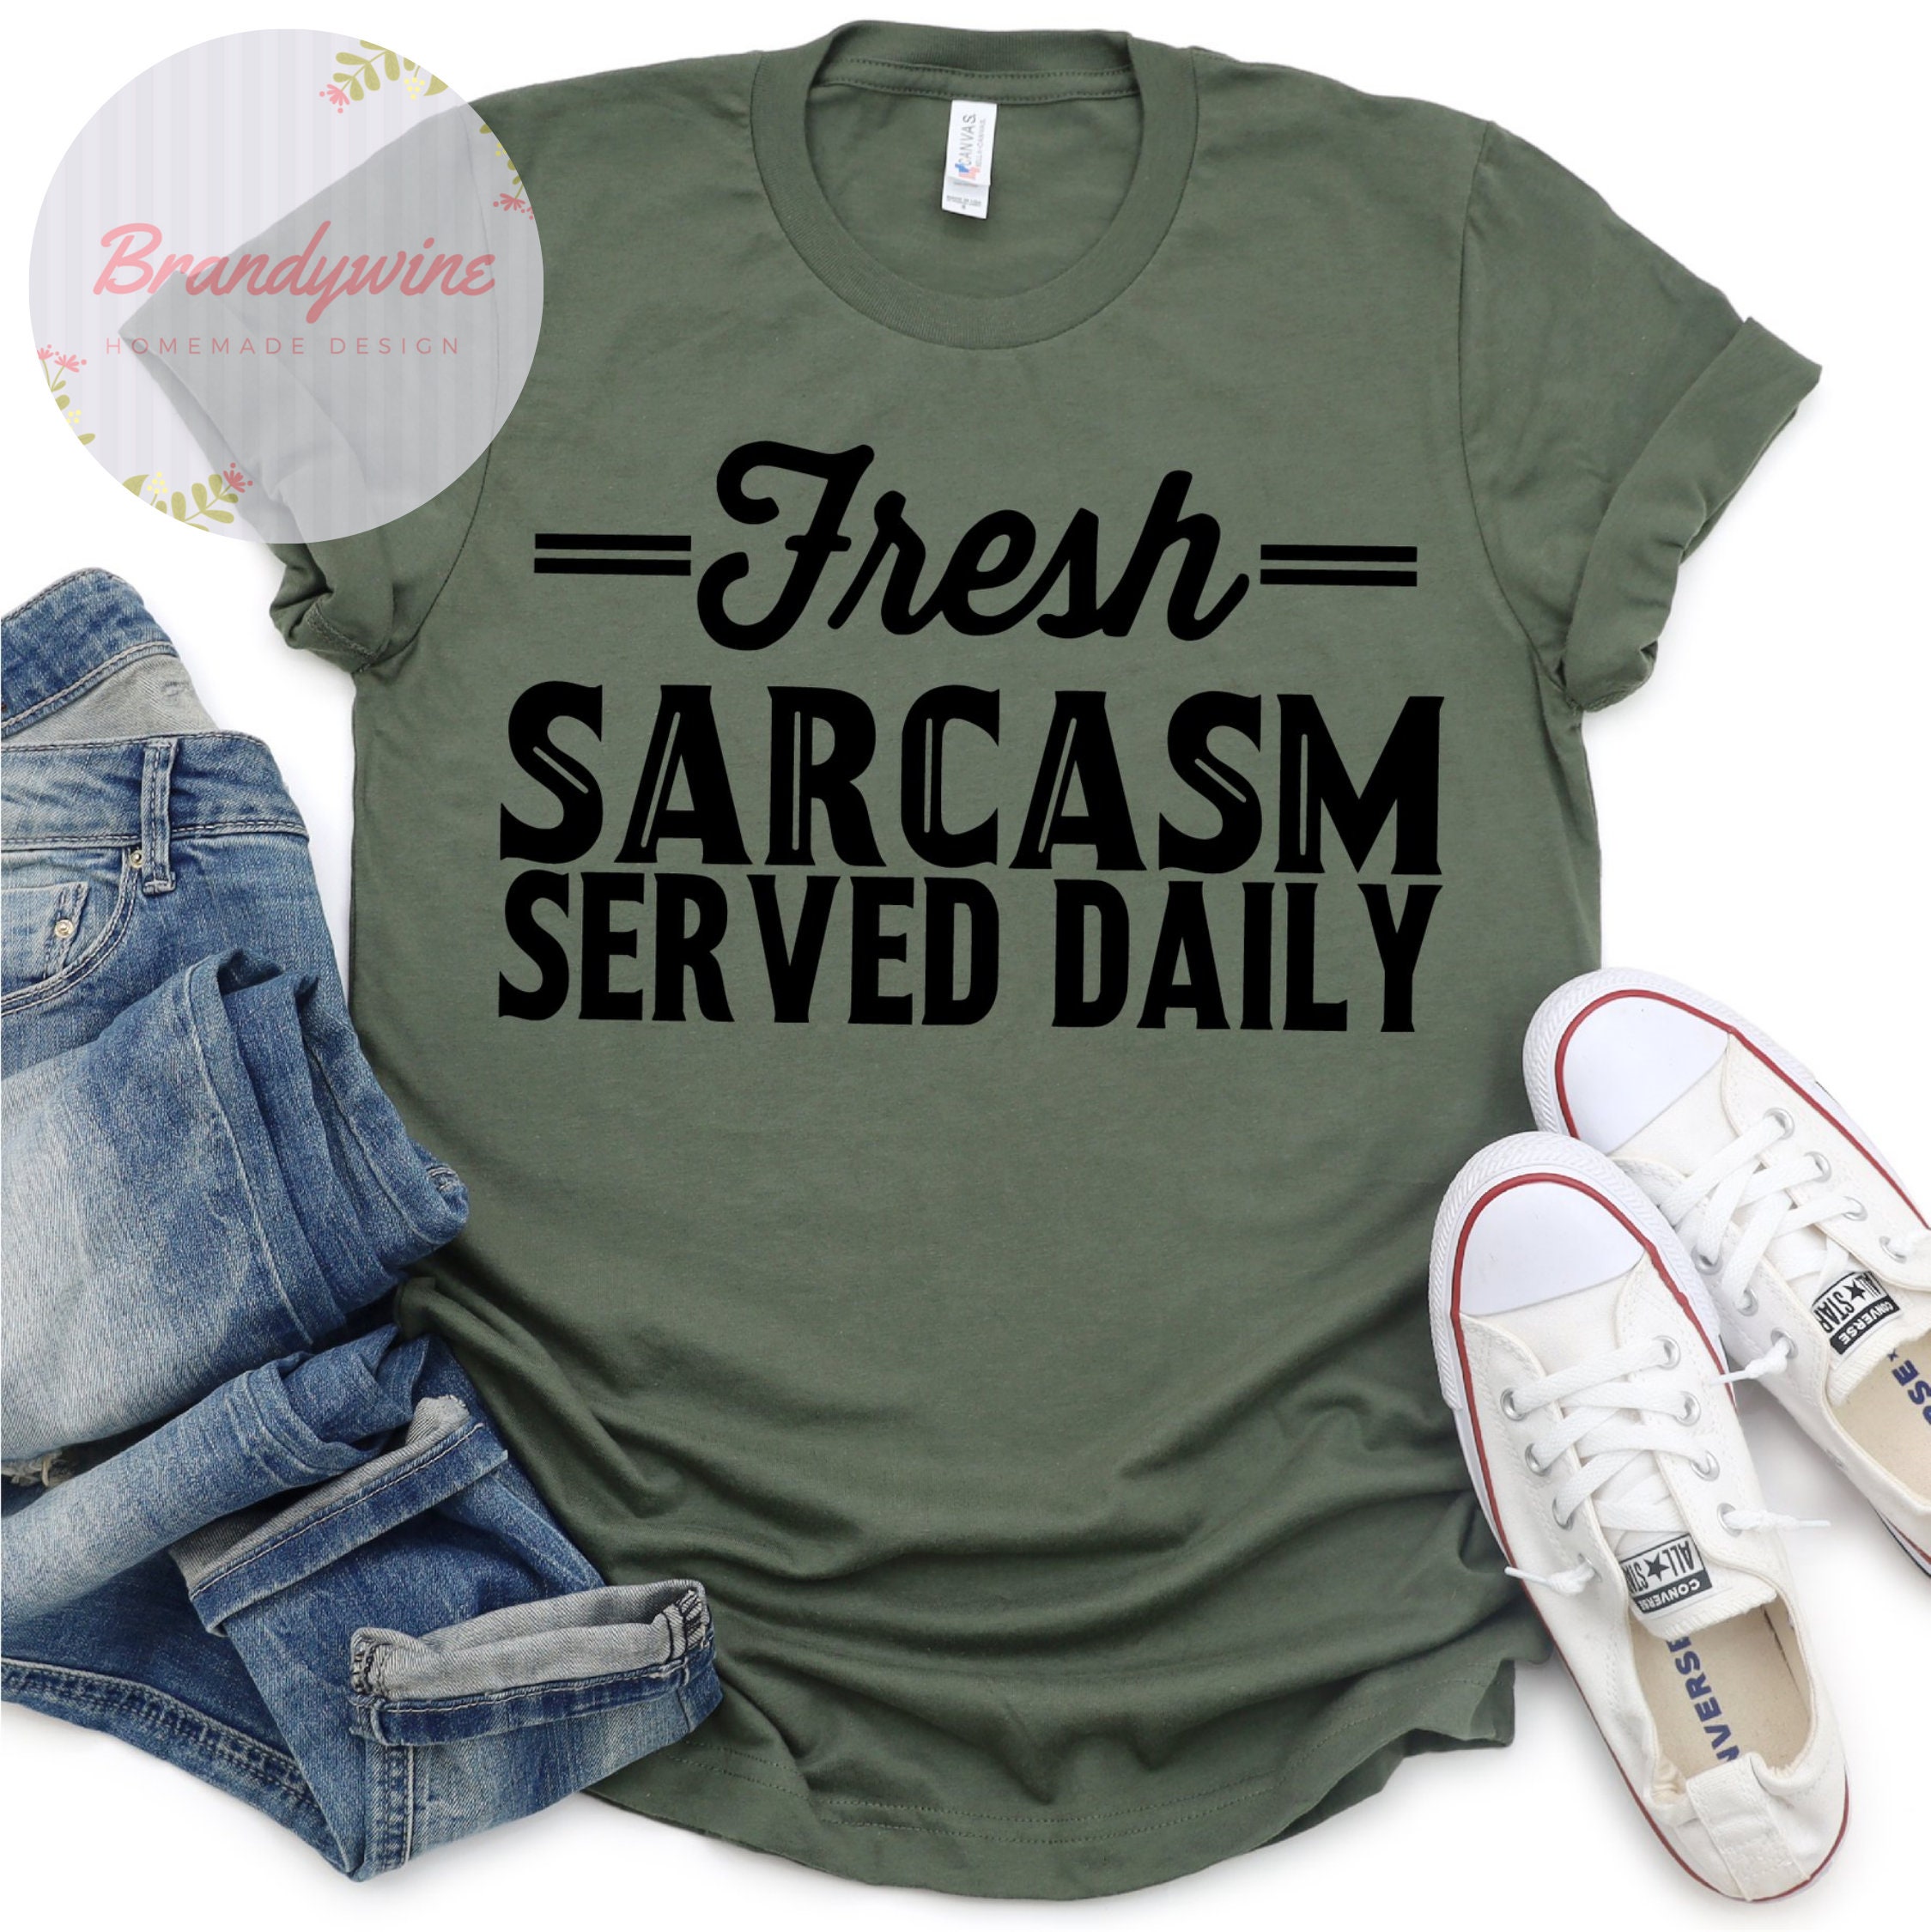 Fresh Sarcasm Served Daily Shirt Funny Shirt for Her Gift pic